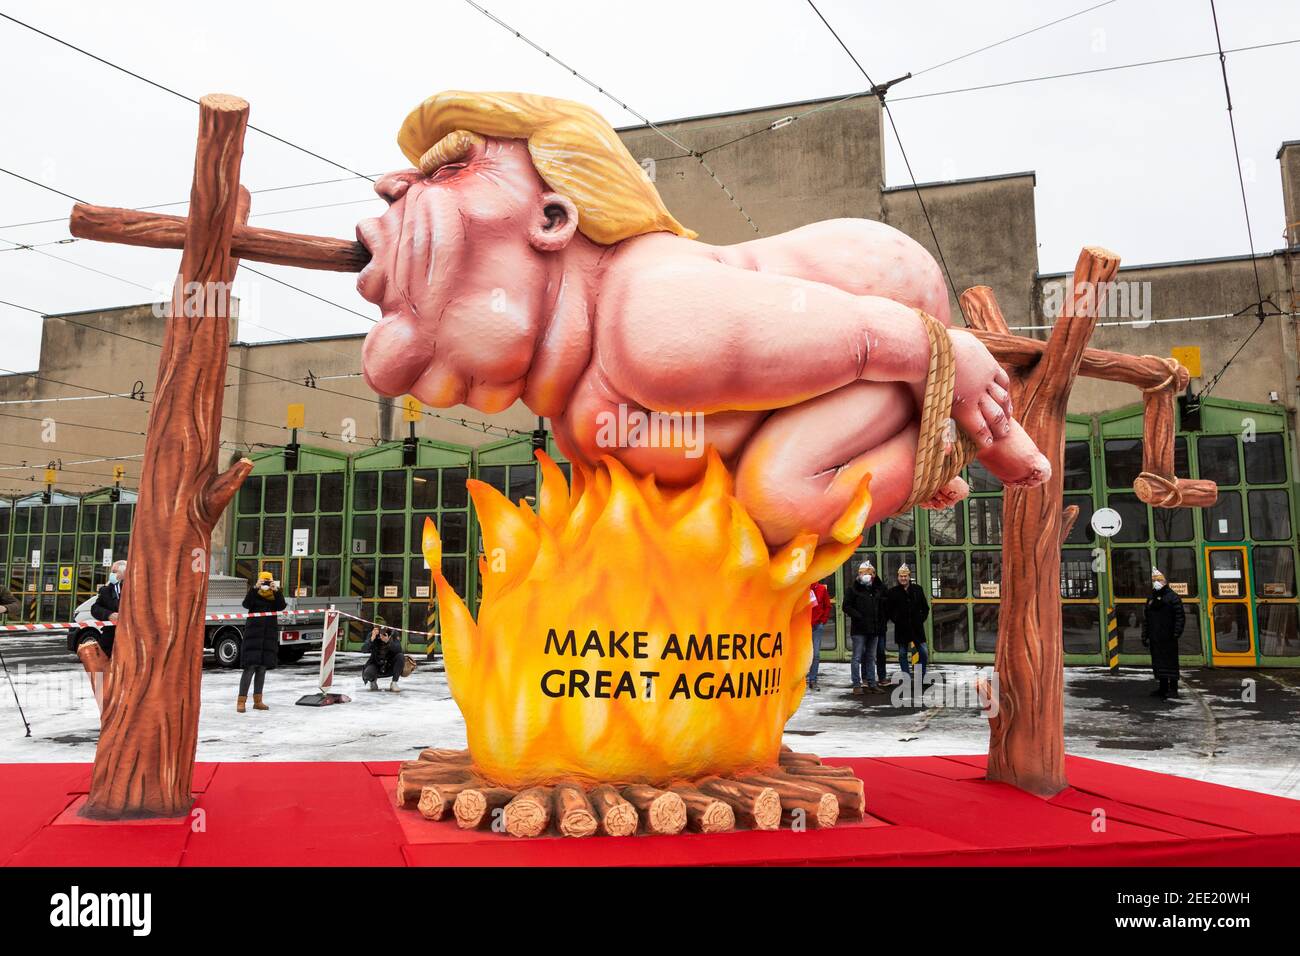 Dusseldorf, Germany. 15 February 2021. Donald Trump - Make America Great Again. Carnival floats presented by German artist Jacques Tilly were presented and later exhibited throughout Dusseldorf as the main carnival parade was cancelled due to the coronavirus pandemic. Stock Photo